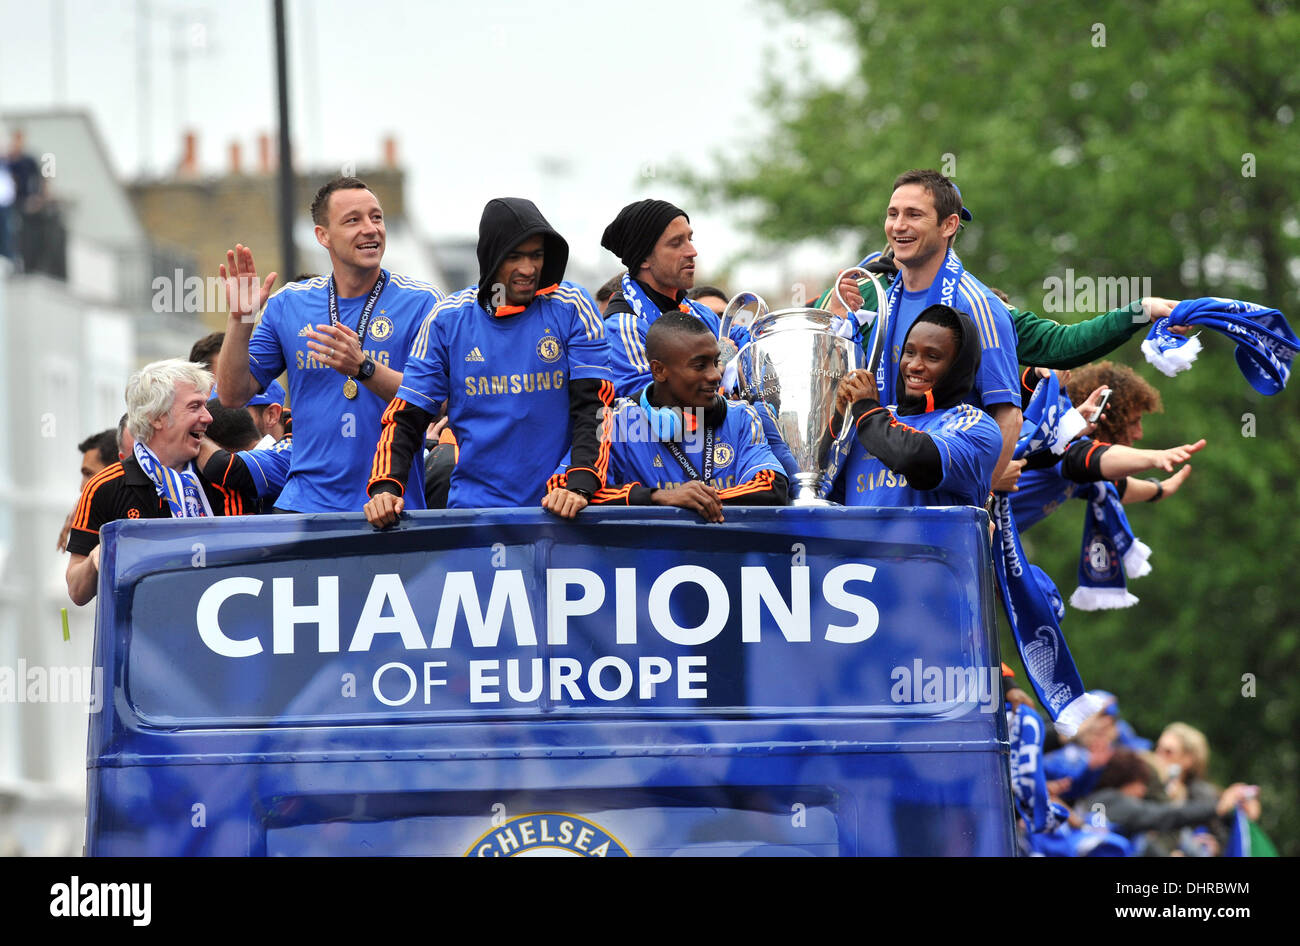 John Terry, Jose Bosingwa, Raul Miereles, Salomon Kalou, Frank Lampard and John Obi-Mikel Chelsea FC European Champions League victory parade - The European Champions League Trophy is displayed from an open top bus by players as they travel along King's Road London, England - 20.05.12 Stock Photo